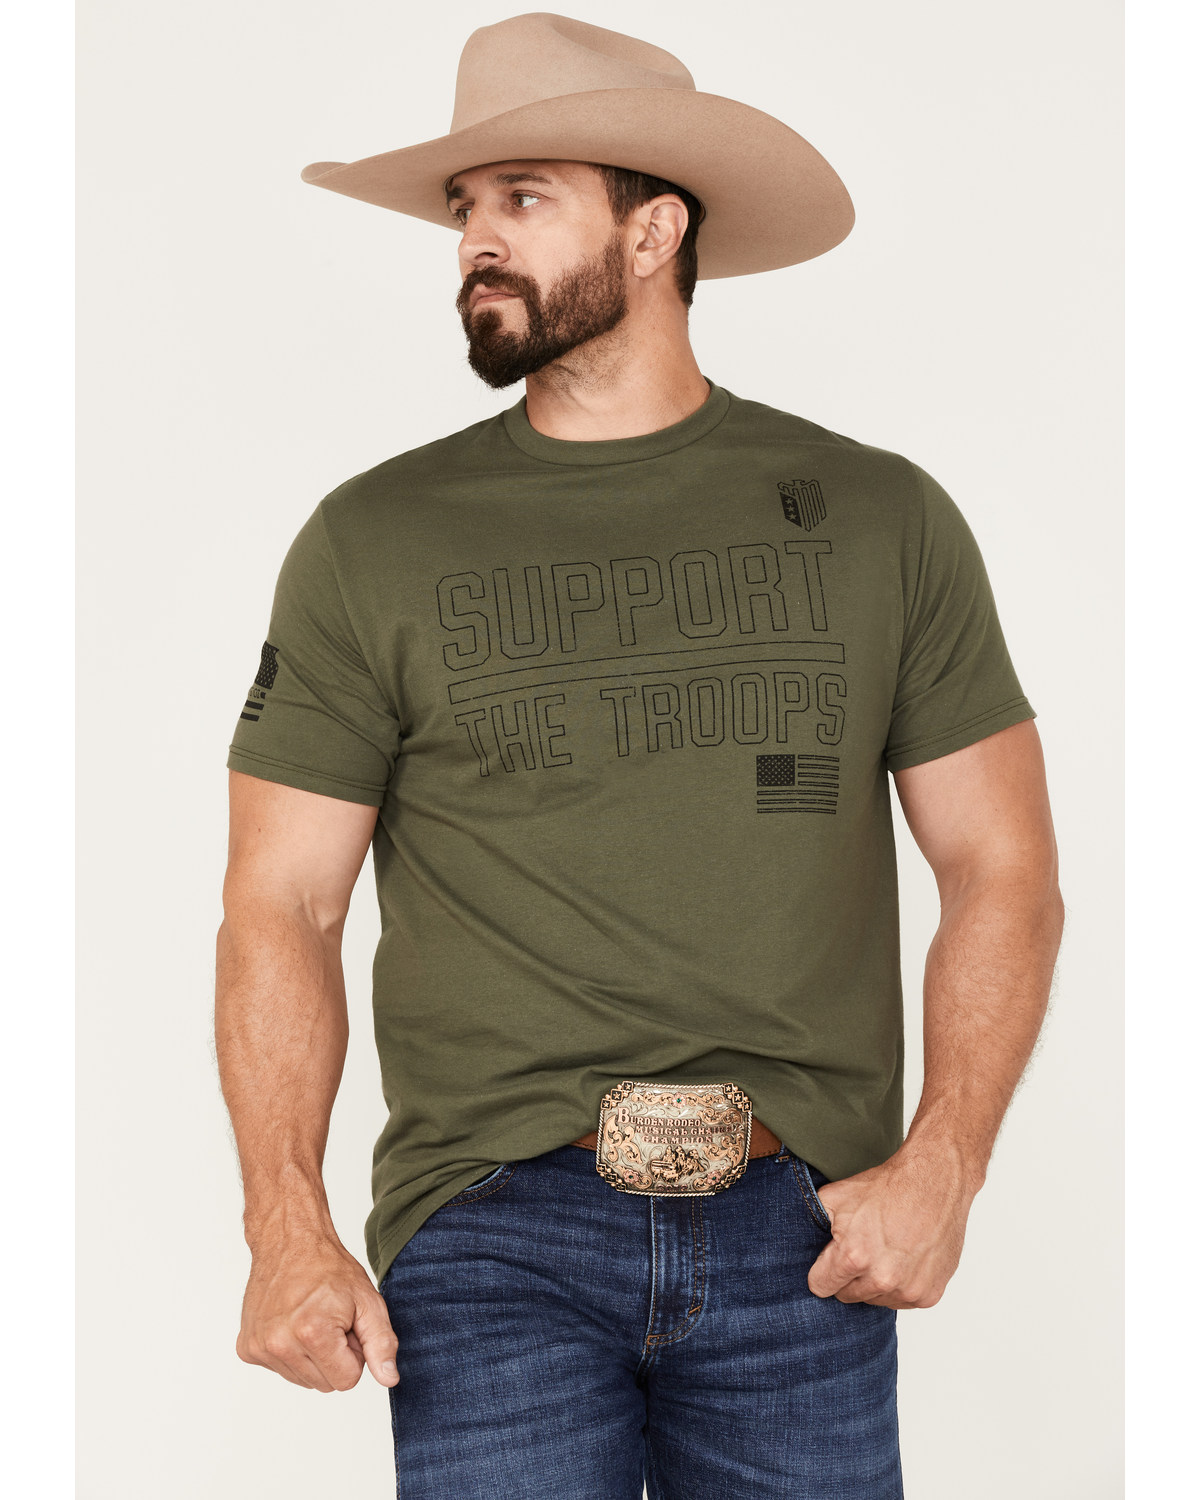 Howitzer Men's Support The Troops Graphic T-Shirt